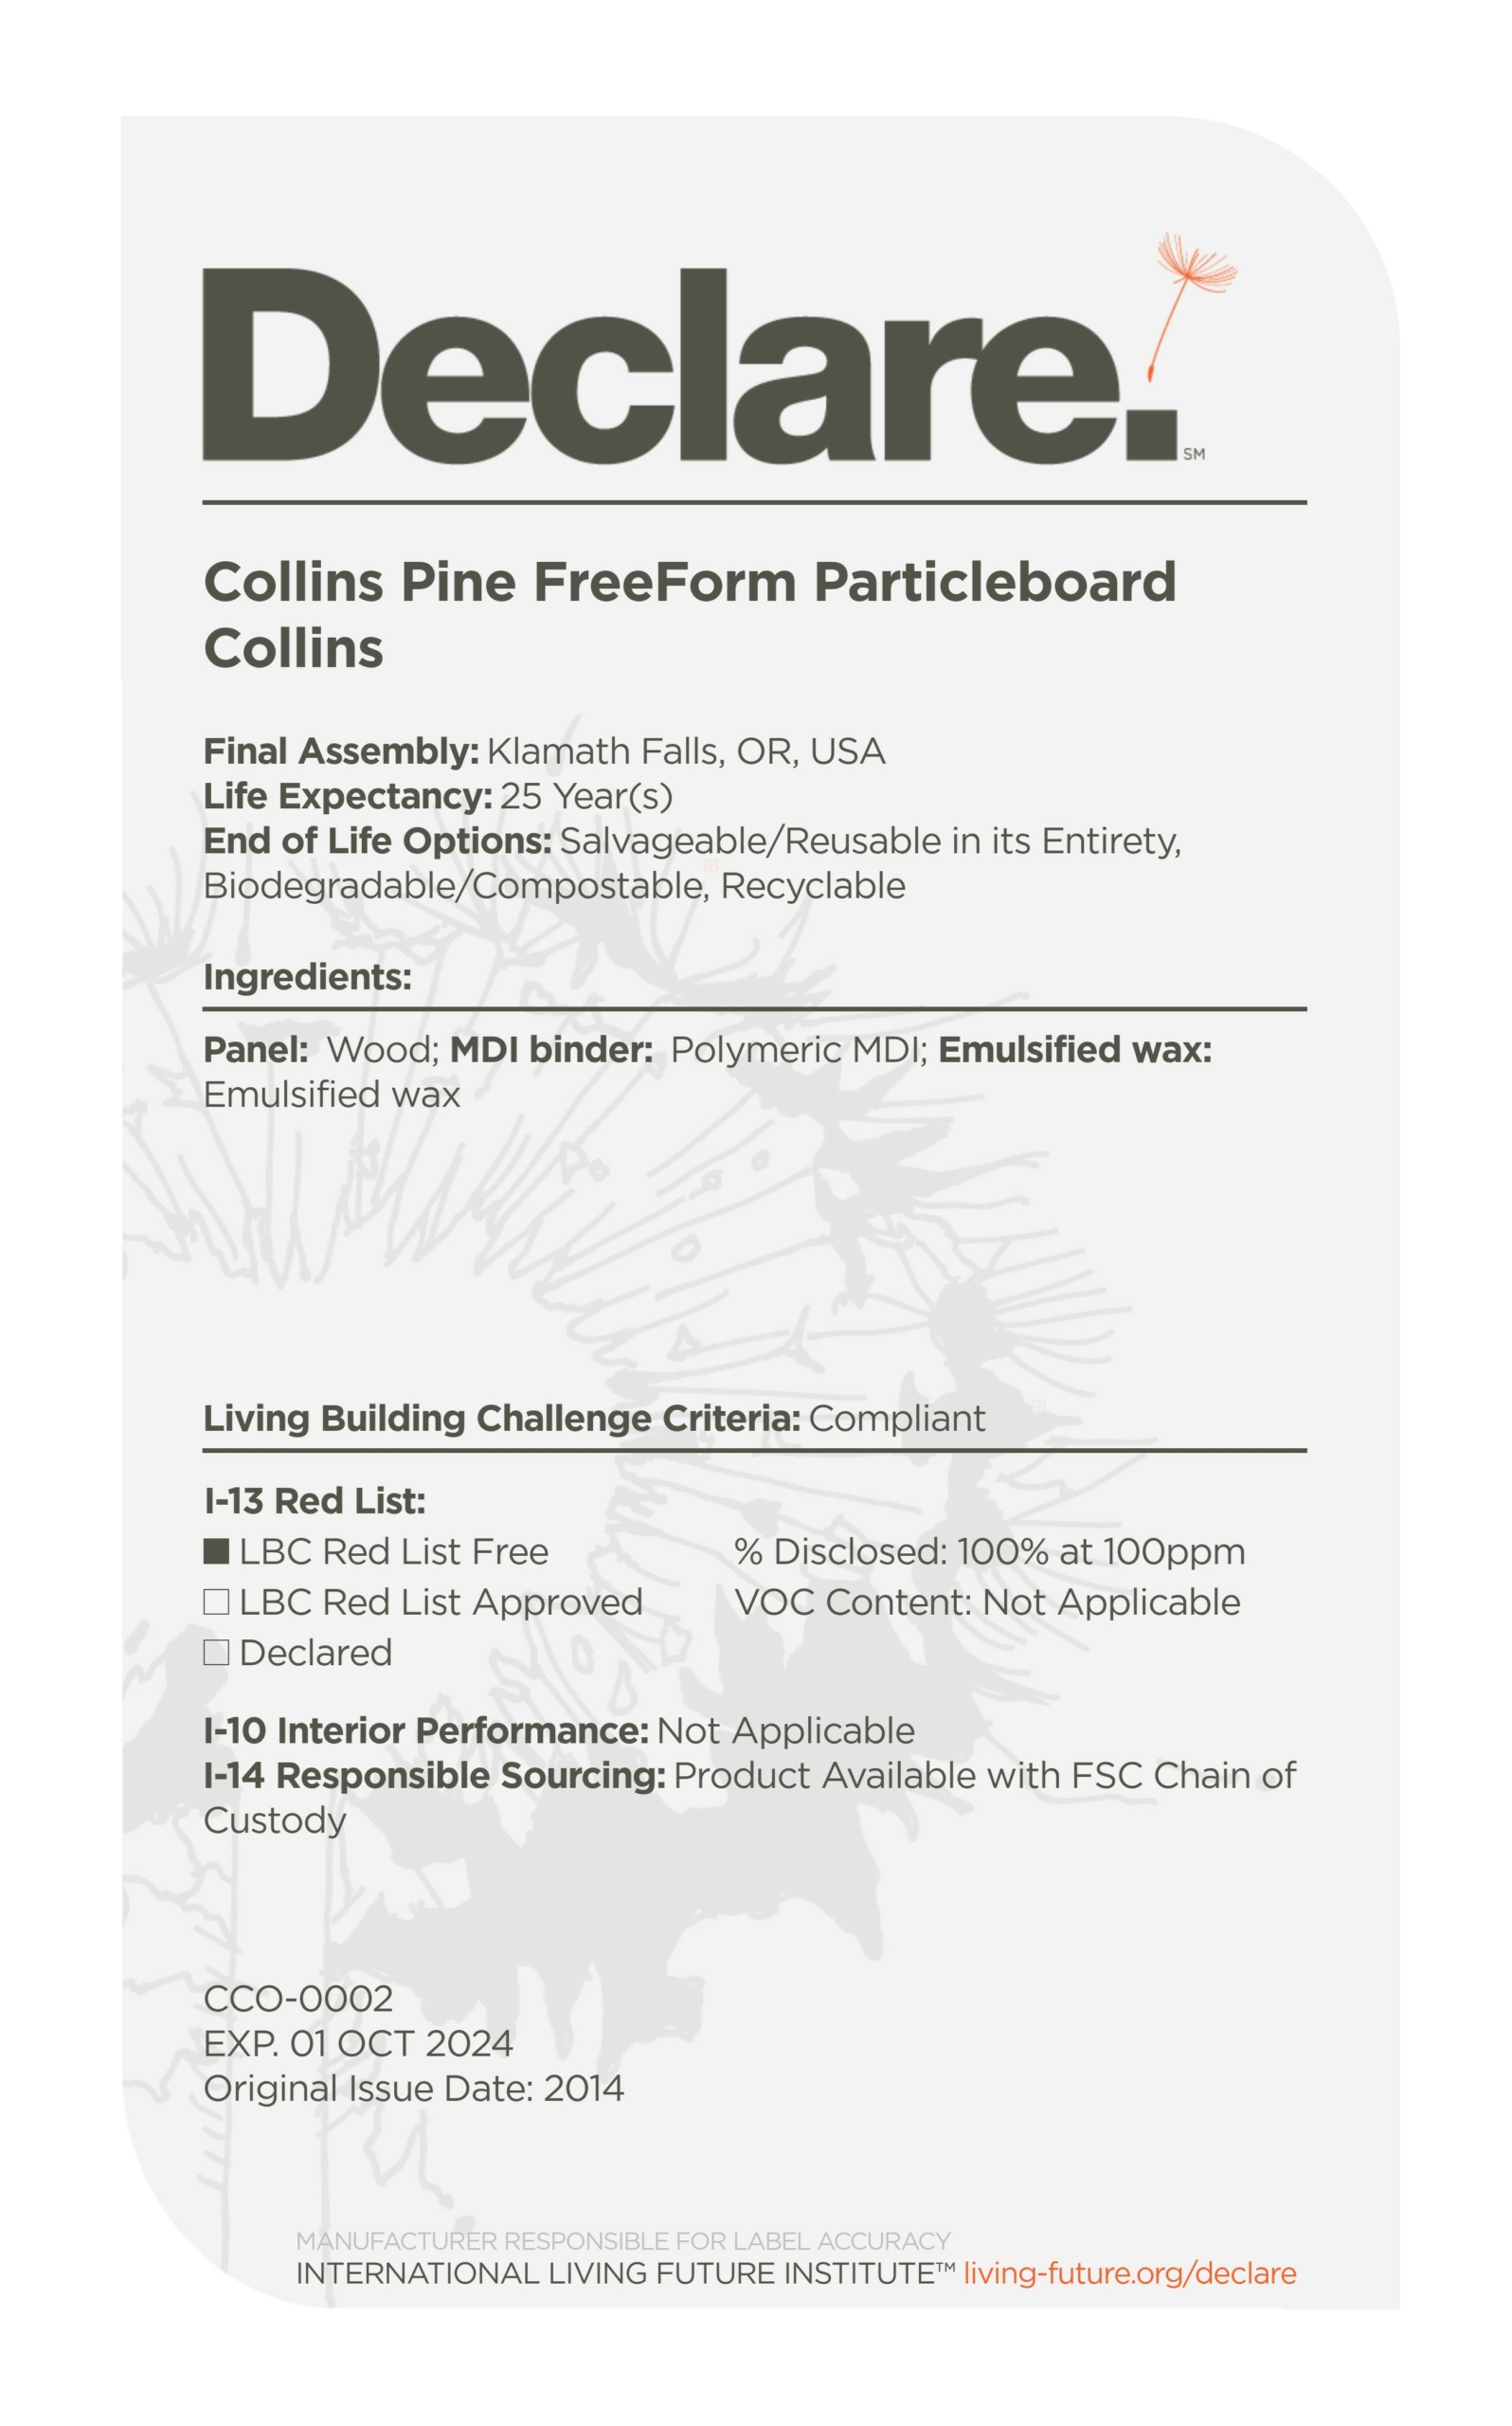 Declare product label - Collins Pine FreeForm Particleboard